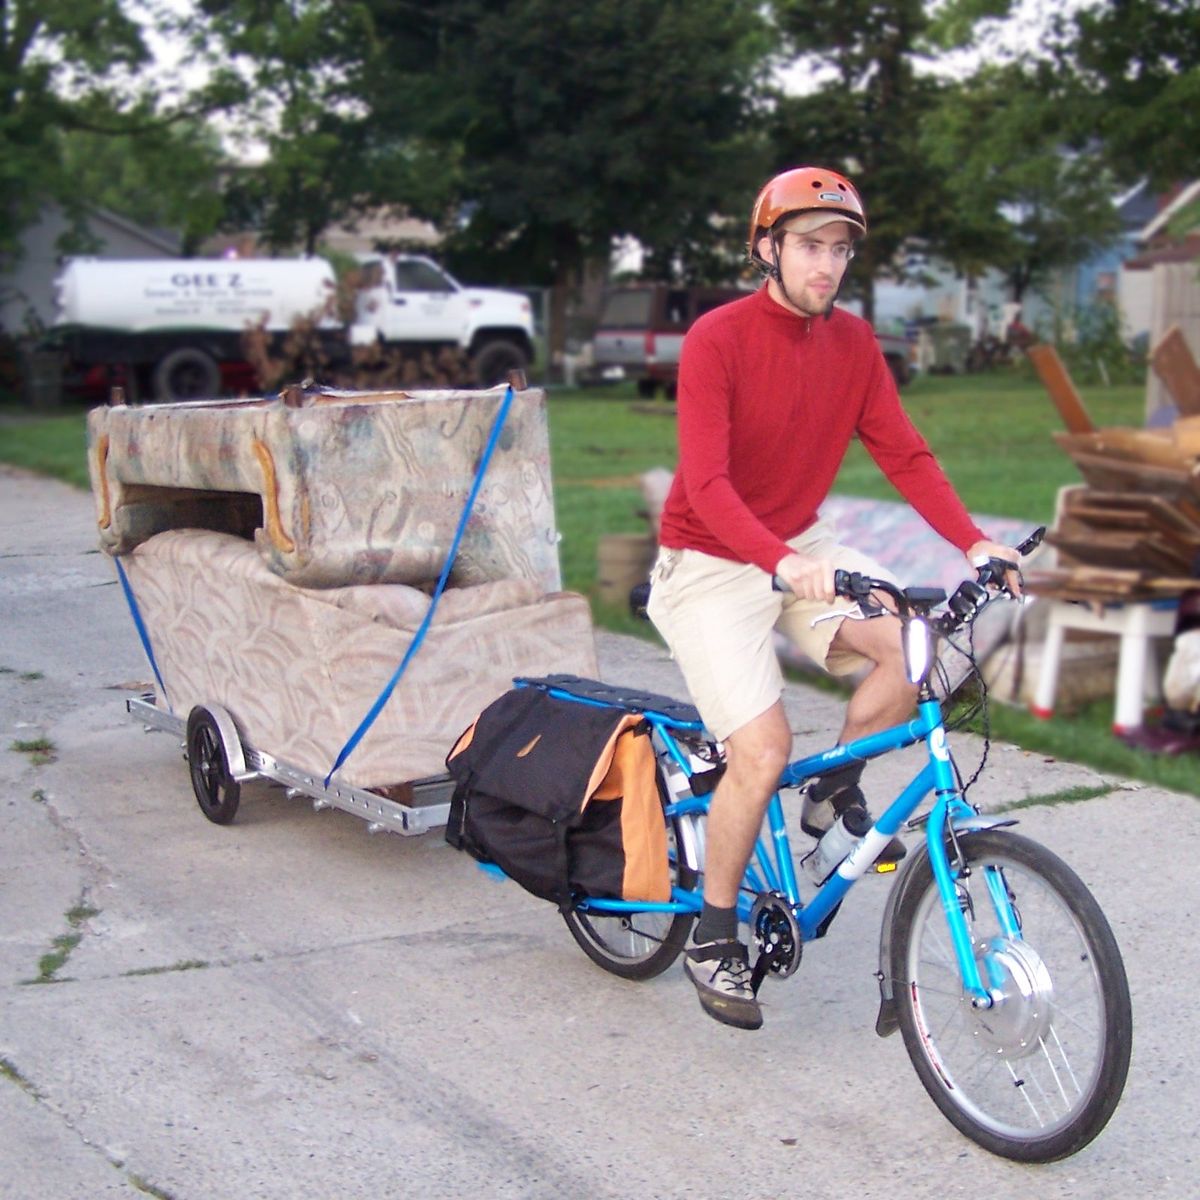 Couch hunting: A cargo bike sport